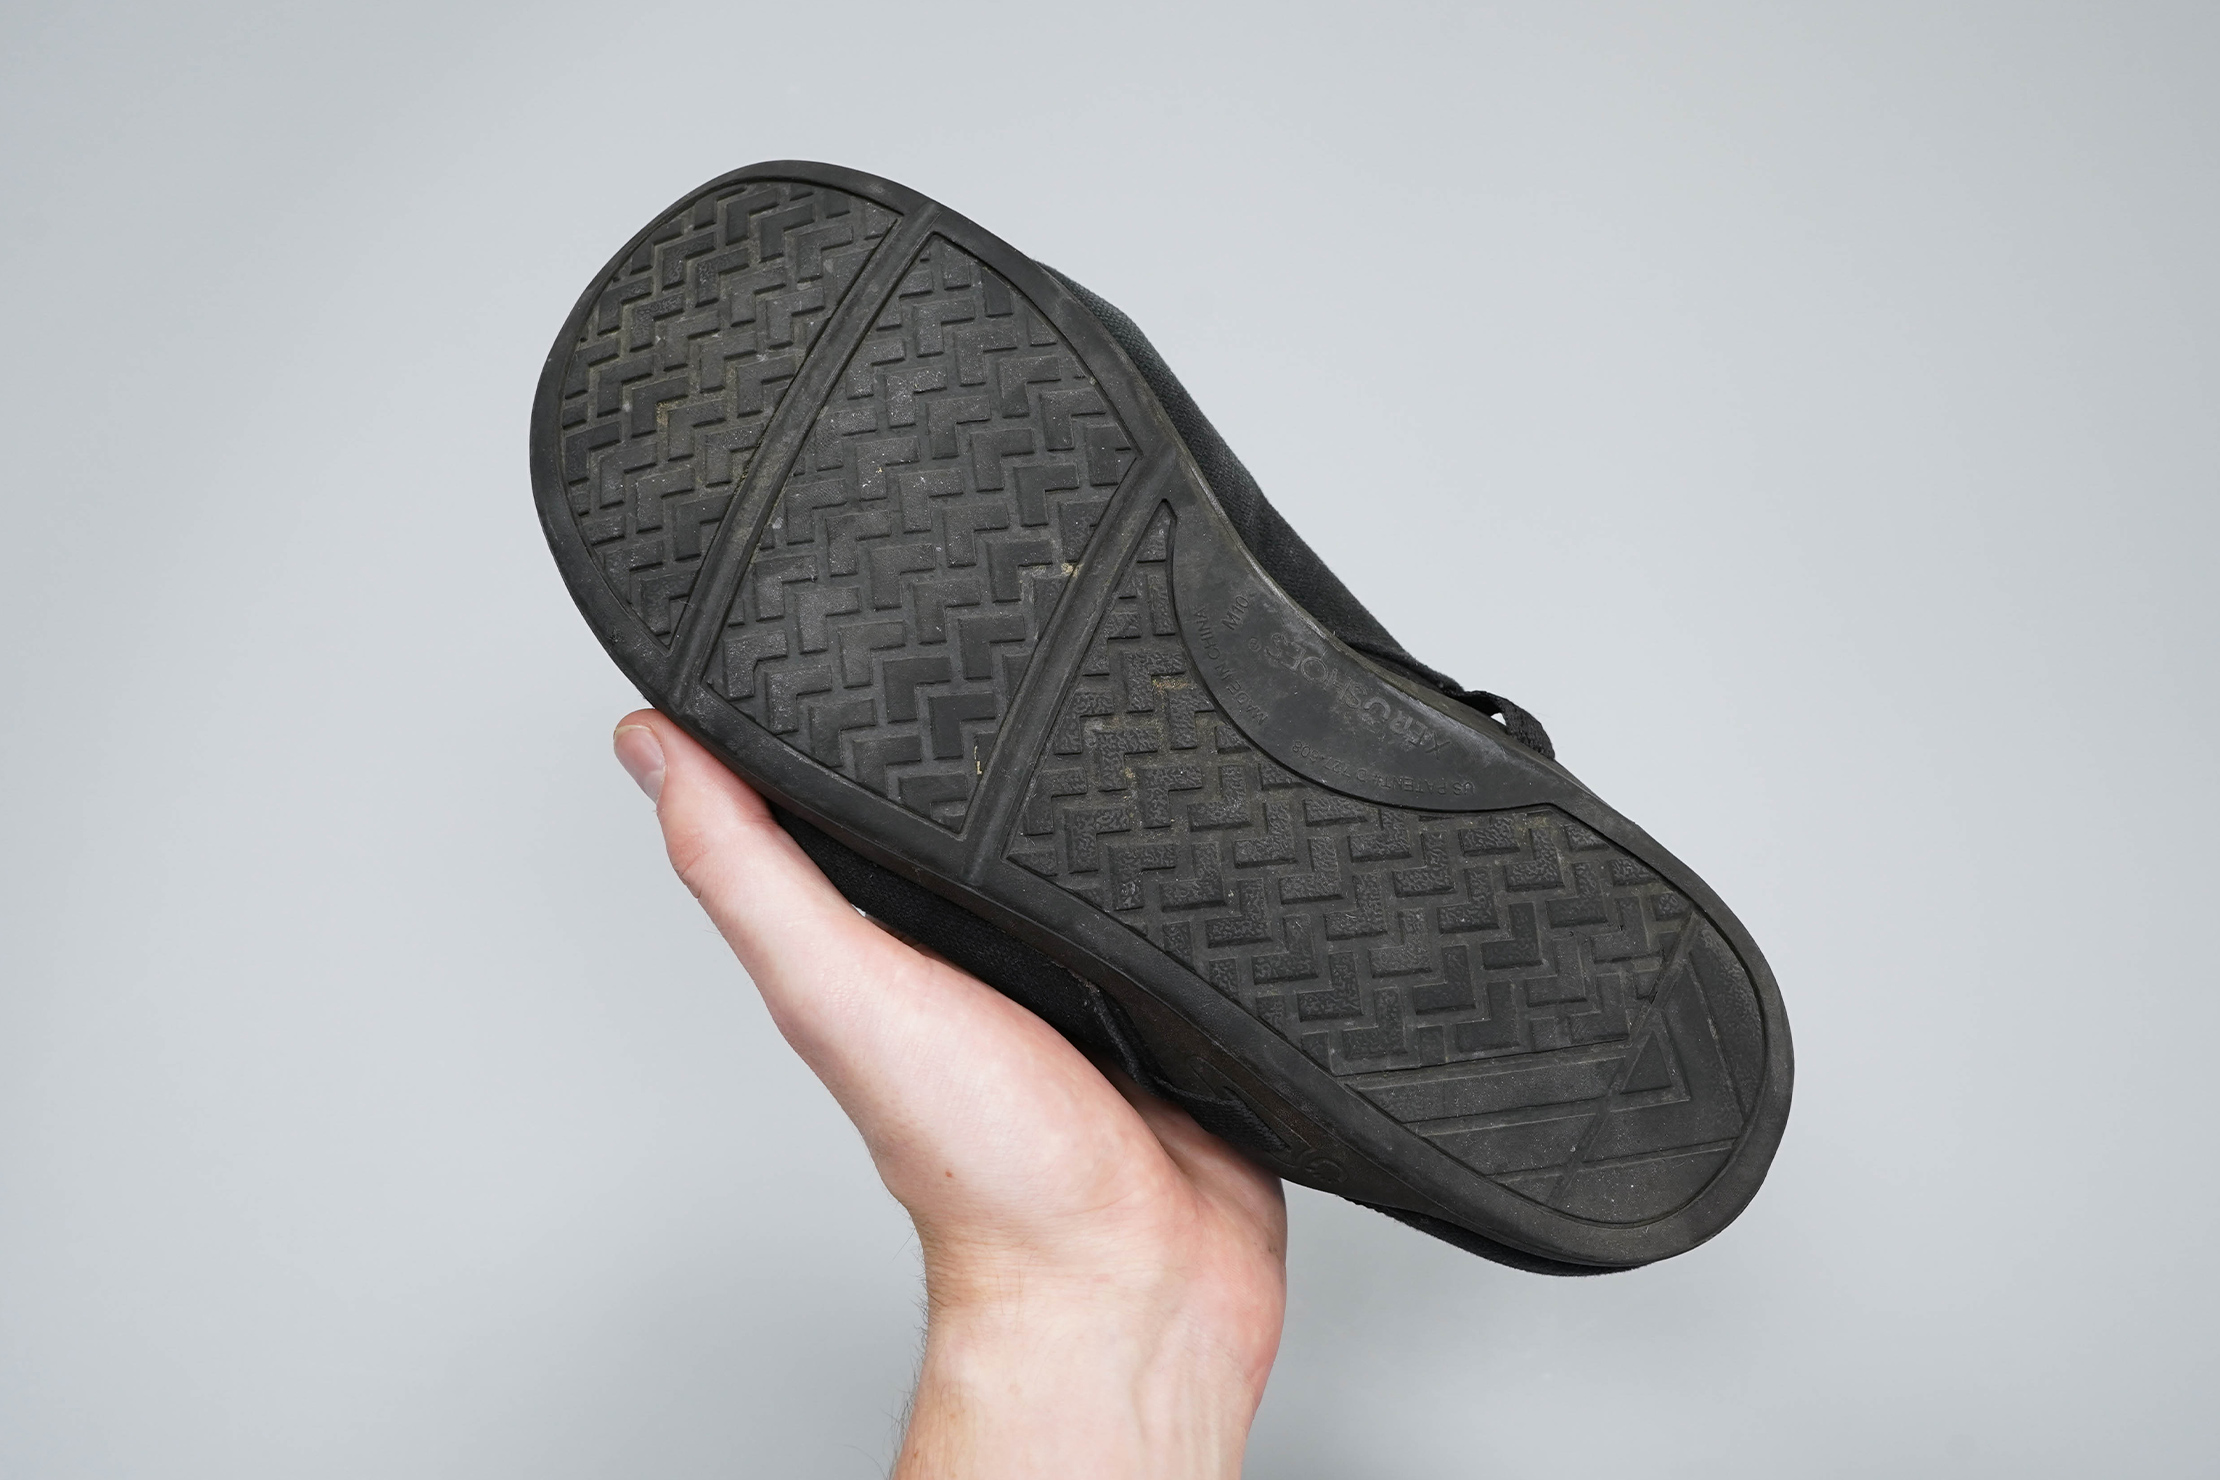 Xero Shoes Hana Review Casual And Minimalist Pack Hacker